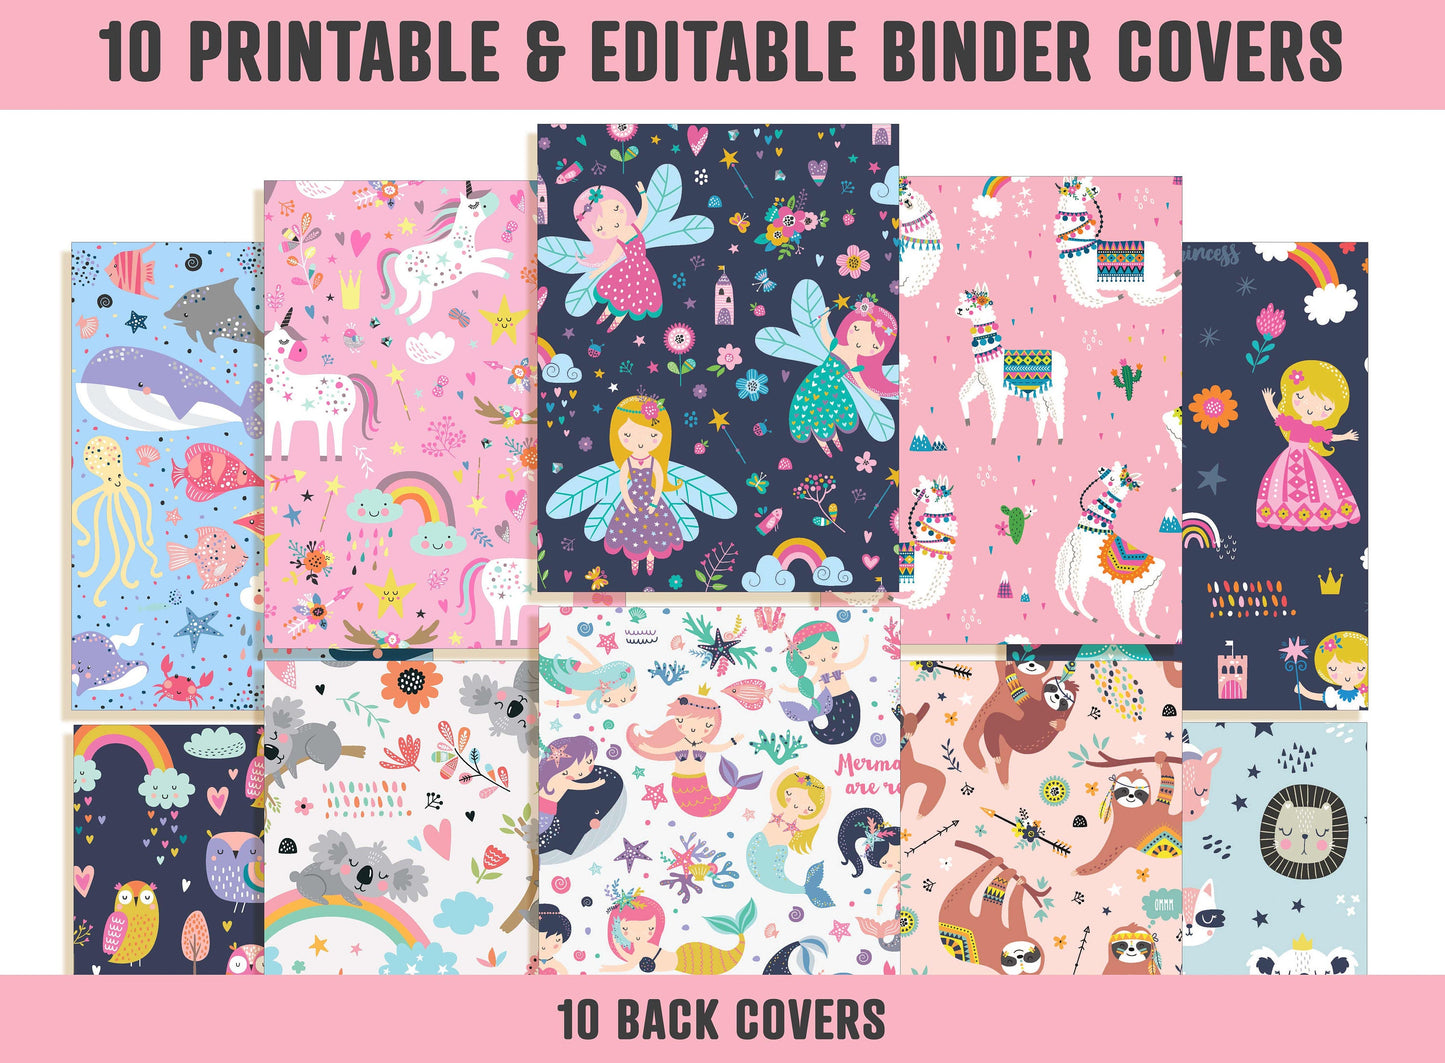 Binder Cover for Girls, 10 Editable Covers+Spines, Teacher/School Binder Template, Planner Cover, Binder Inserts, Printable Binder Cover